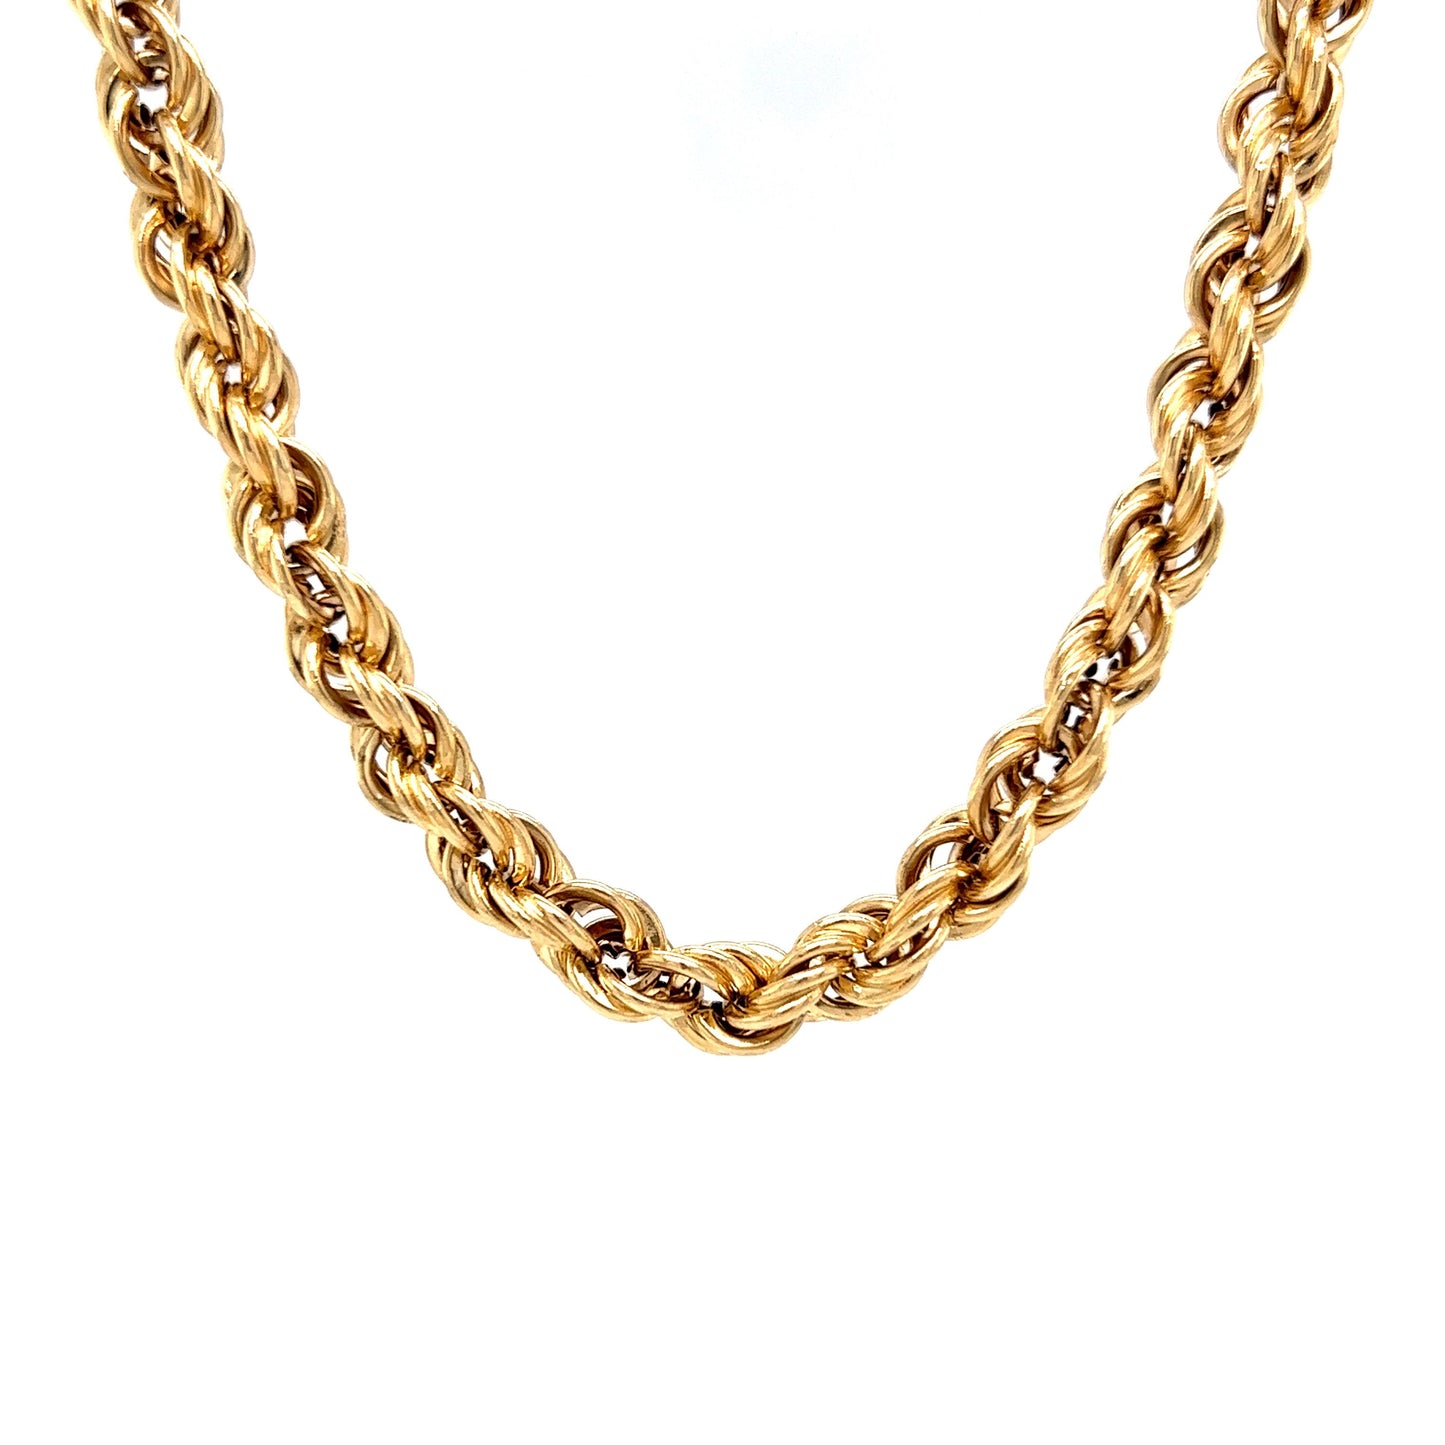 24 Inch Oversized Rolo Chain in 14k Yellow Gold